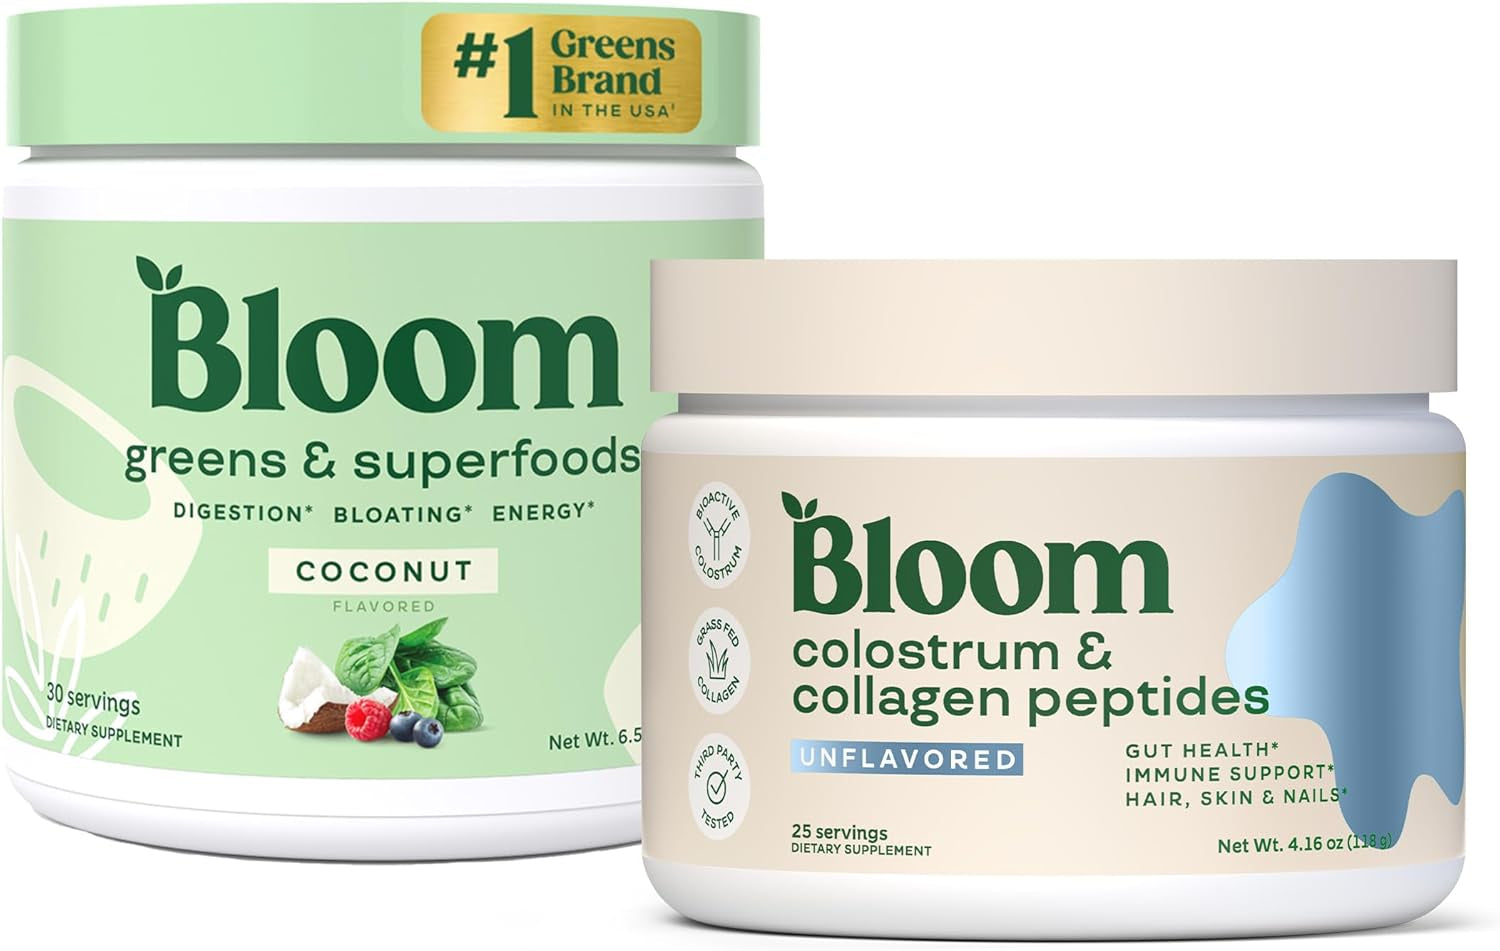 Premium Bloom Nutrition Superfood Greens Powder with Digestive Enzymes, Probiotics, Prebiotics for Gut Health and Bloating Relief - Coconut and Bovine Colostrum Powder with 40% IgG